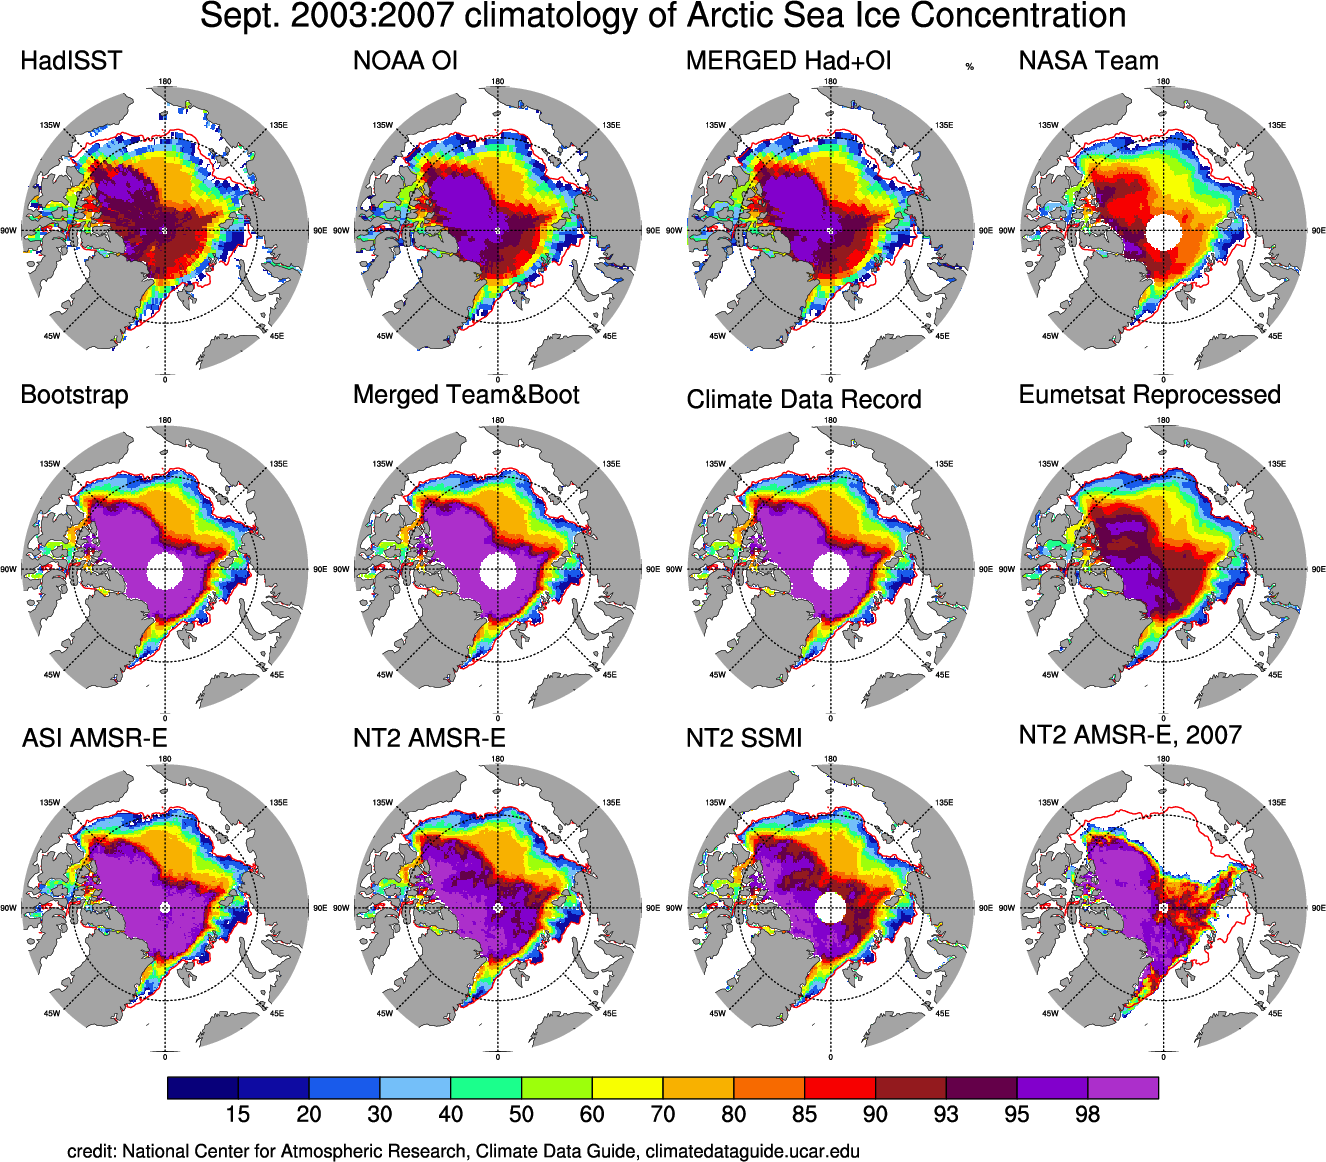 Sea Ice Concentration data: Overview, Comparison table and graphs